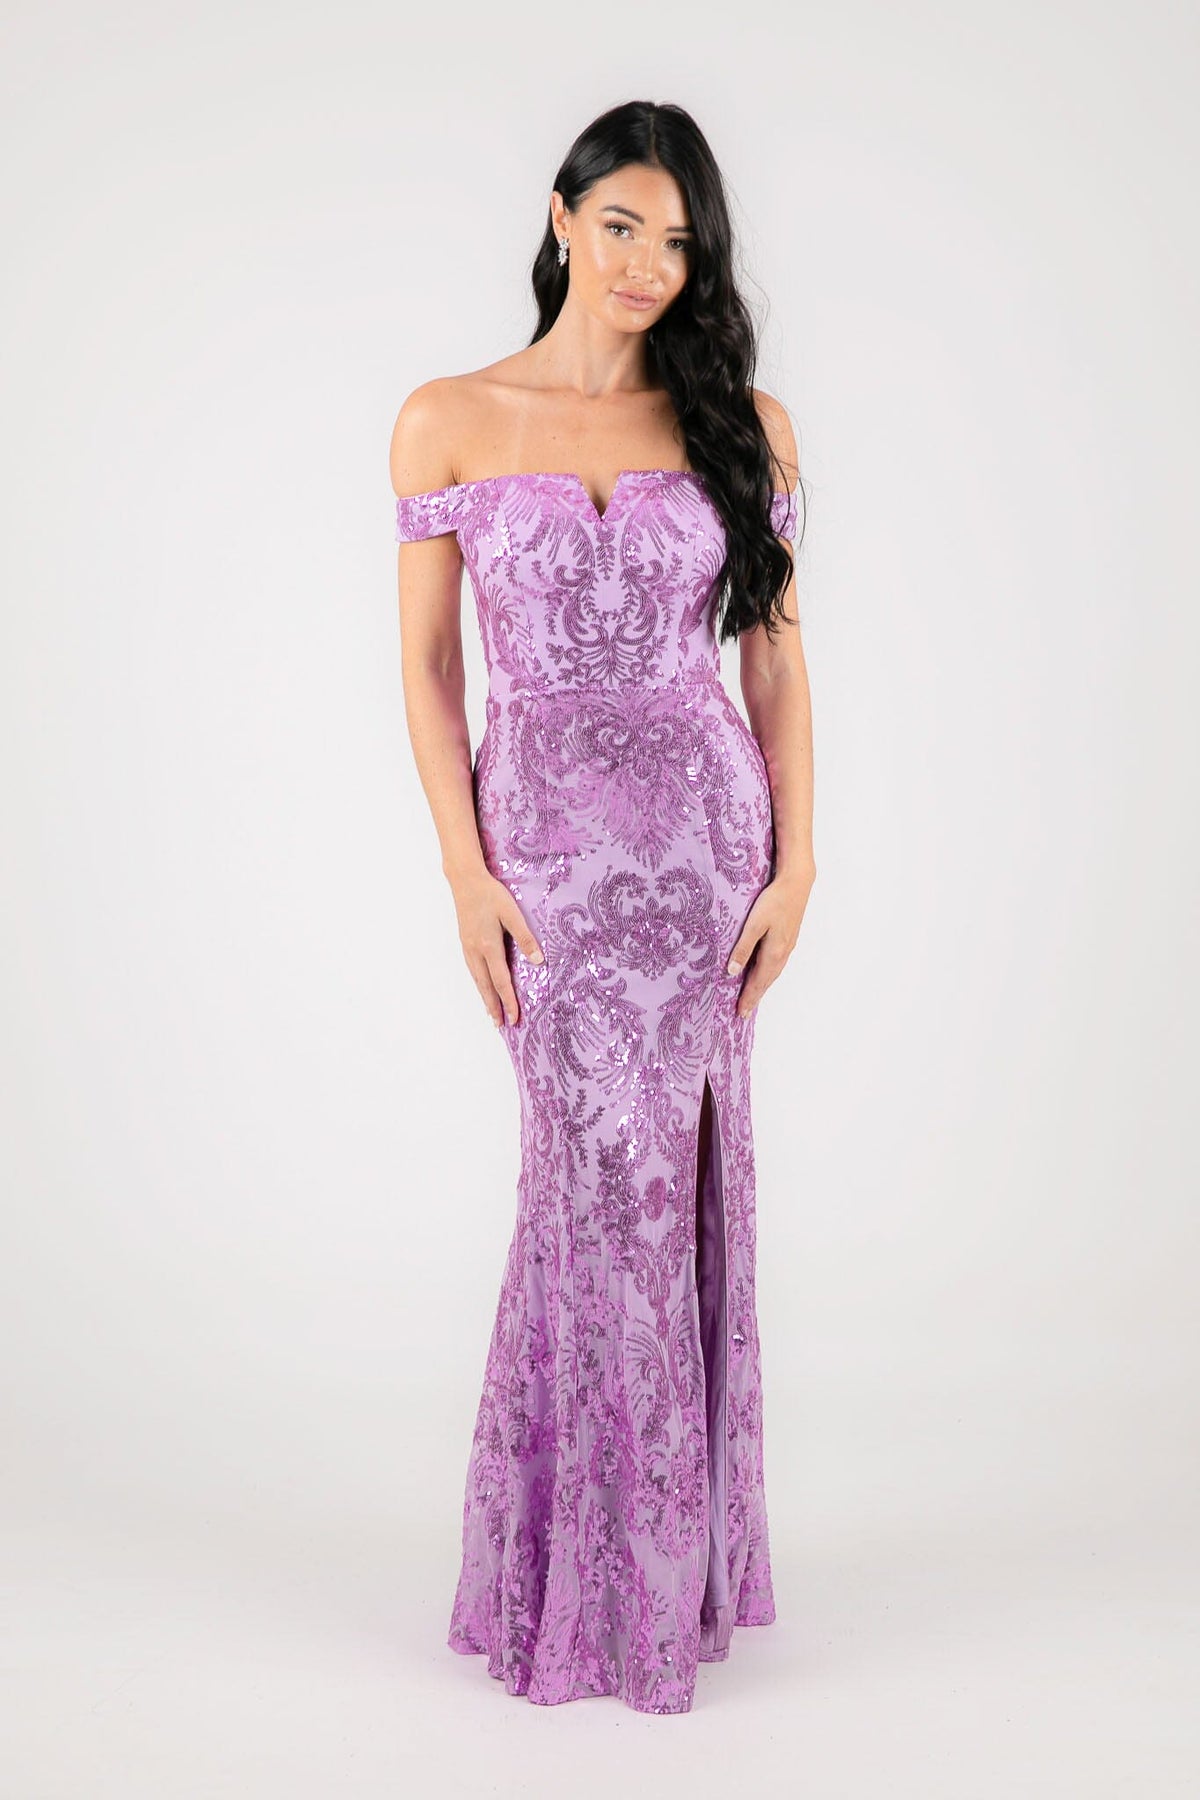 Purple Lilac Sequins Off Shoulder Full Length Maxi Dress with V Cut Out Neckline Detail and Slit on the Left Leg